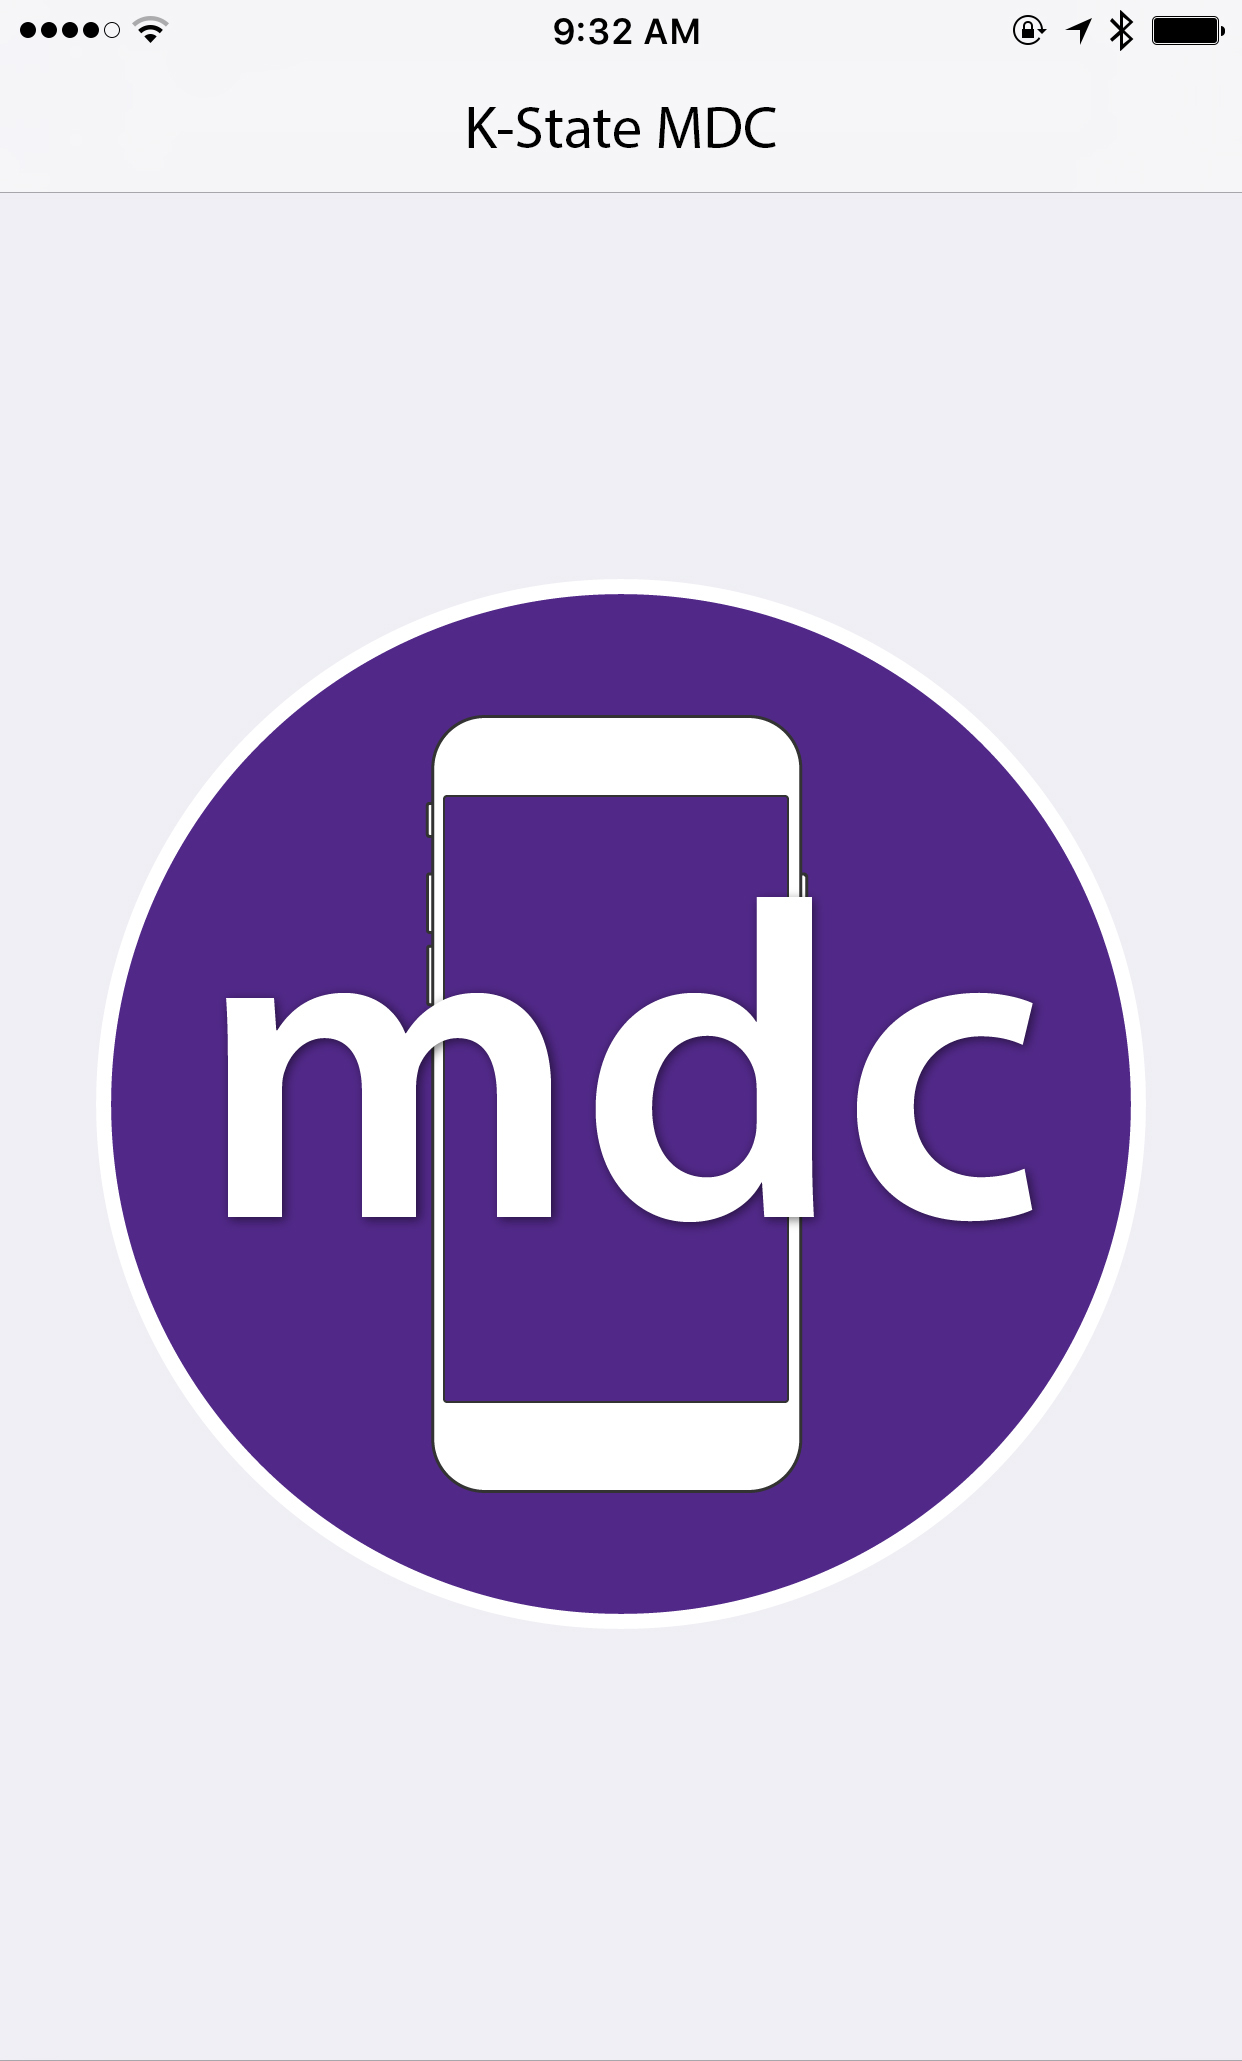 The Mobile Development Club Logo displayed on a stylized phone